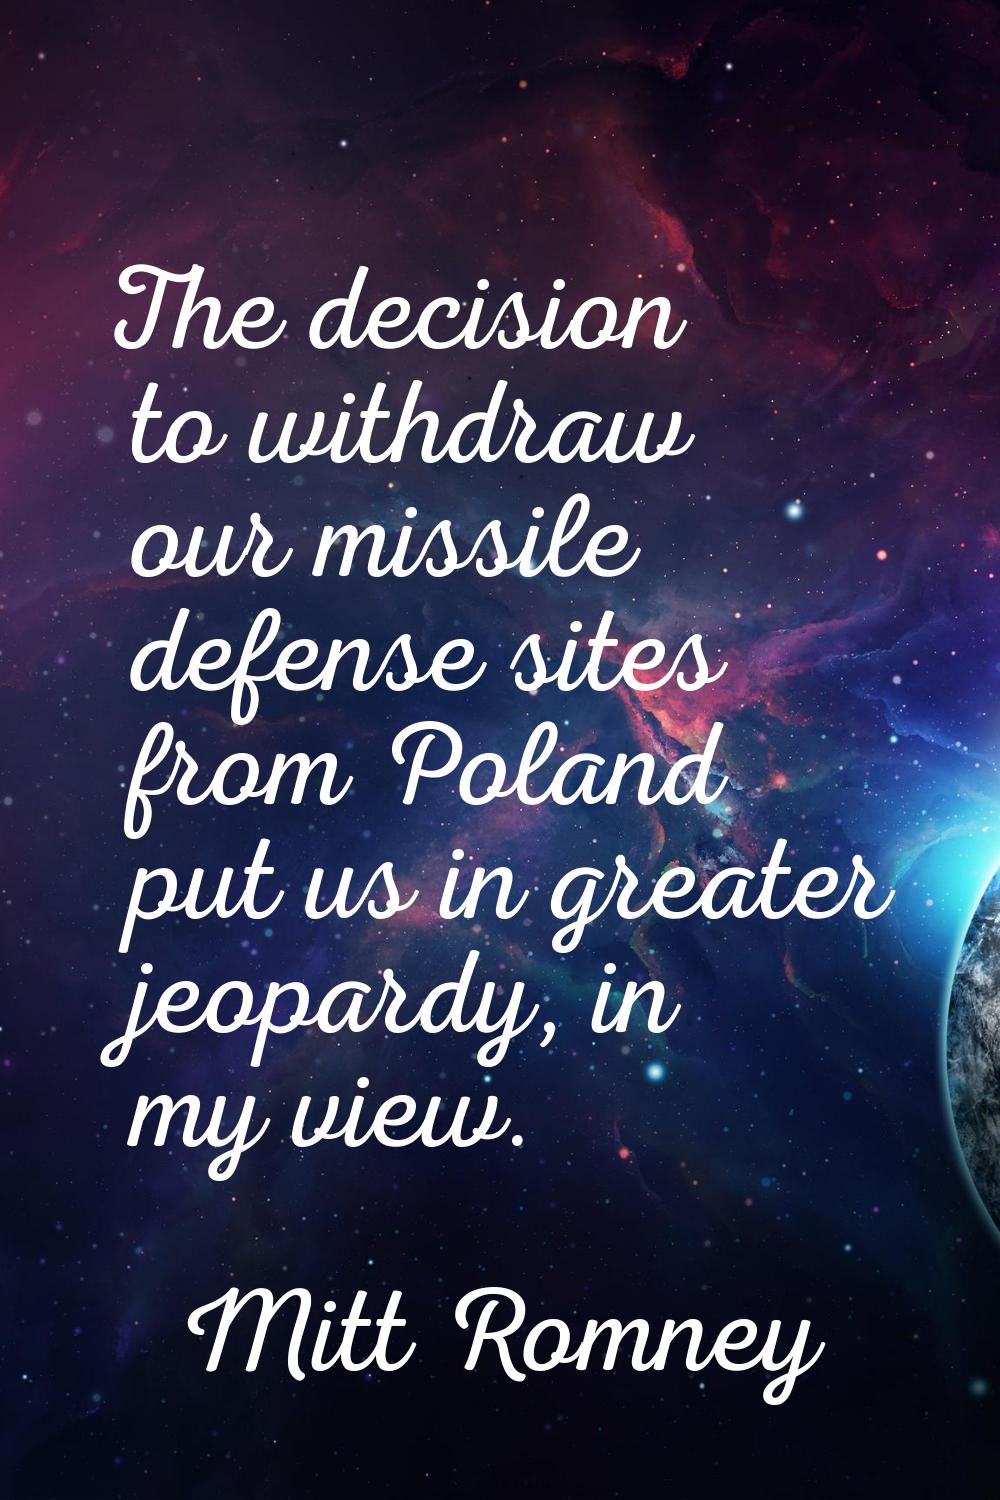 The decision to withdraw our missile defense sites from Poland put us in greater jeopardy, in my vi